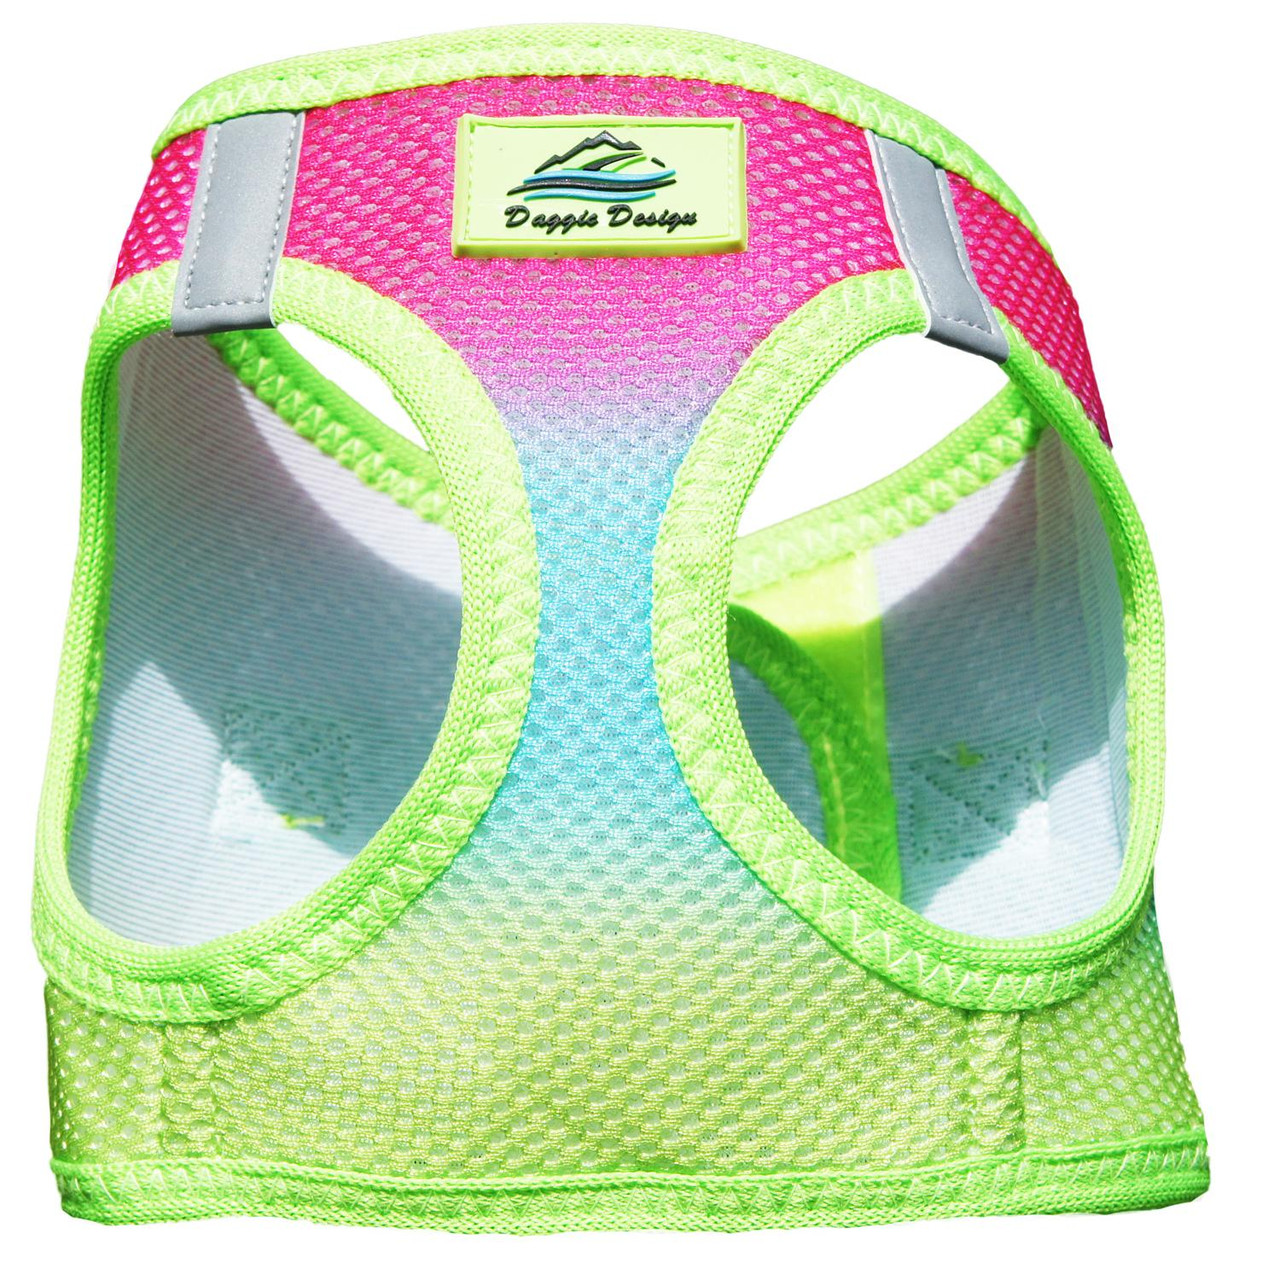 American River Choke Free Dog Harness - Ombre - Northern Lights Small